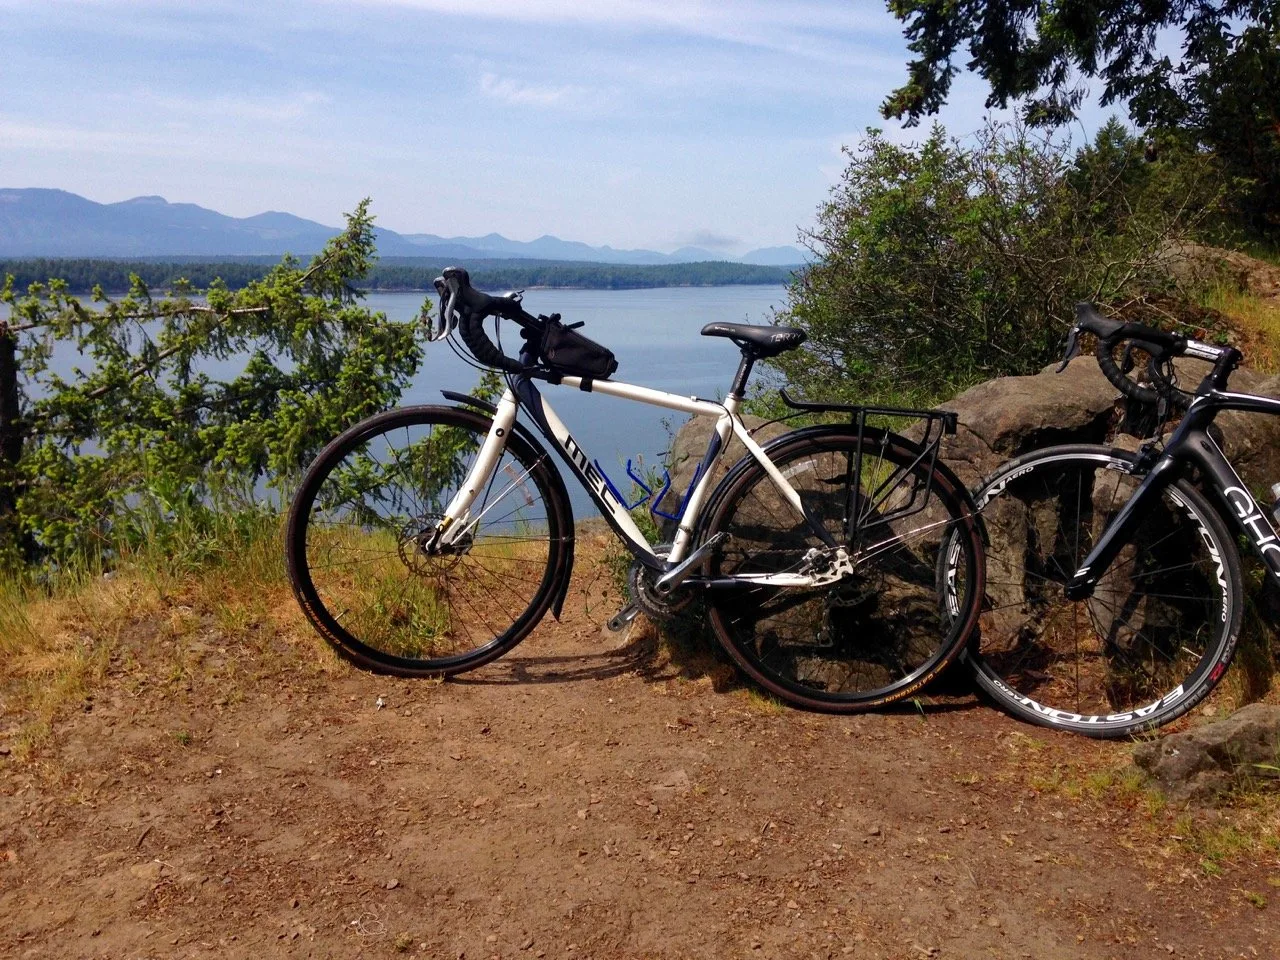 Bikes at Lover's Leap on Galiano Island